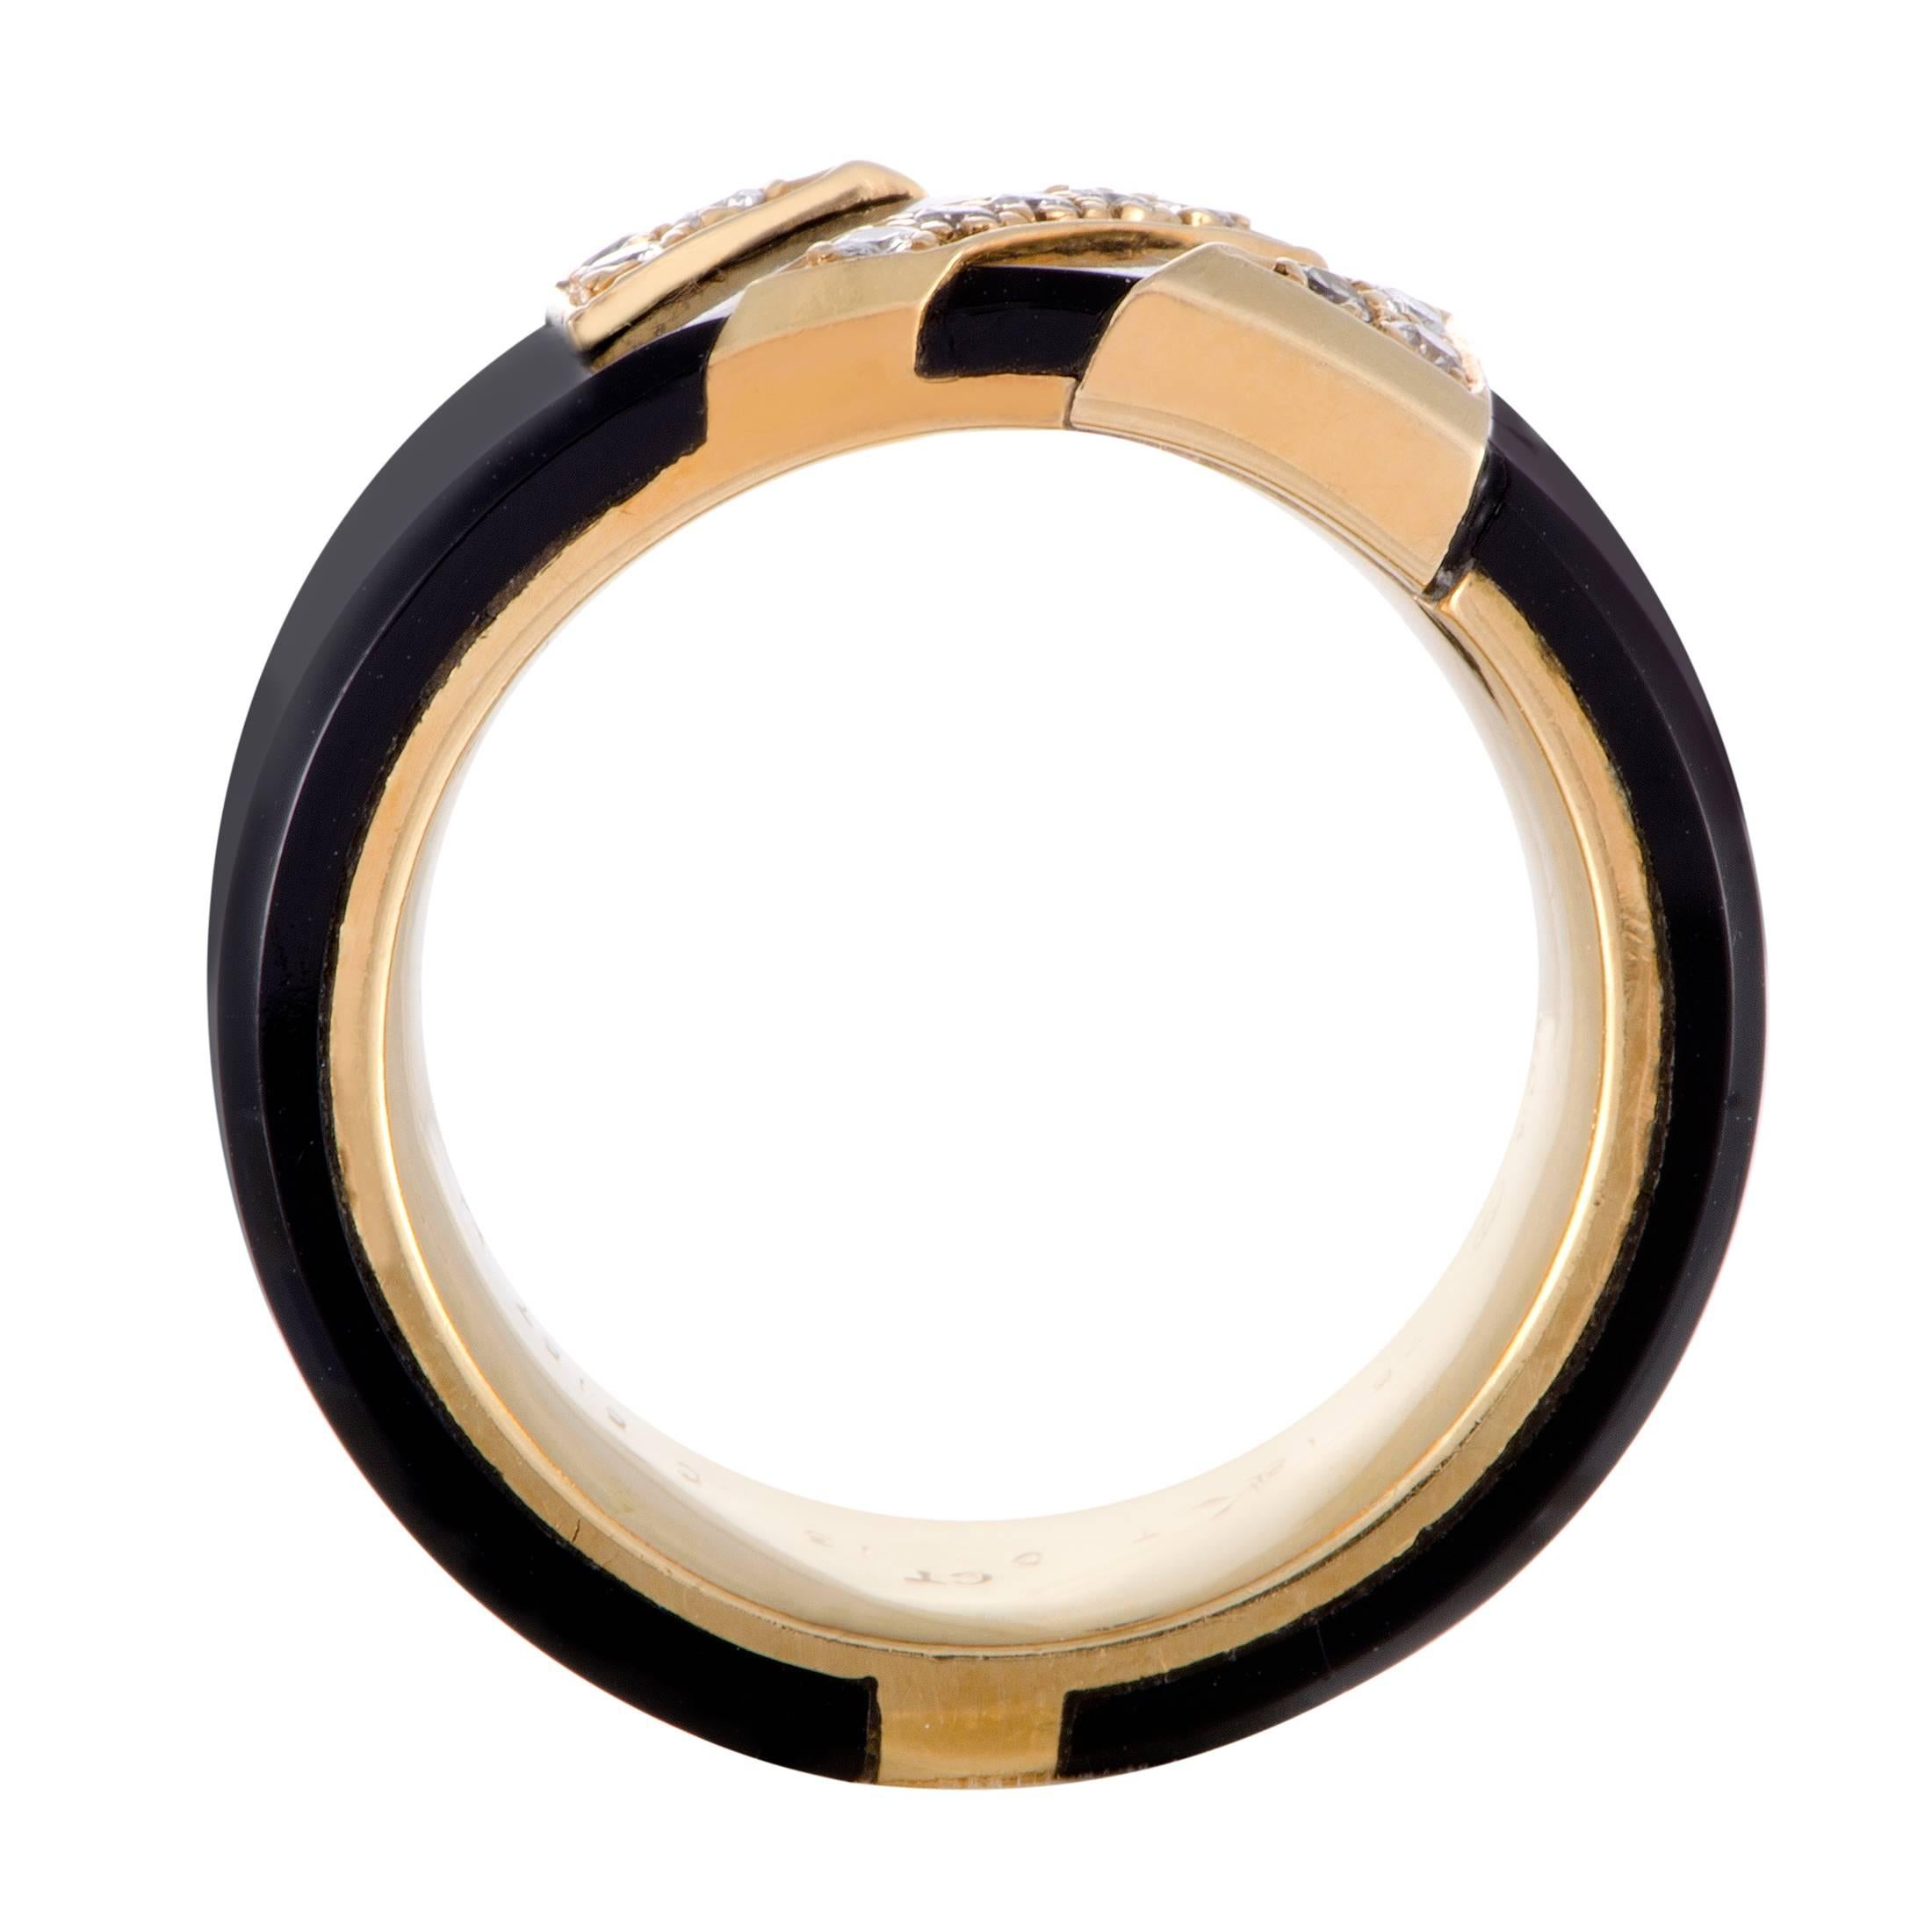 Exuding contemporary elegance with an intriguing twist, this remarkable band from Van Cleef & Arpels is made of radiant 18K yellow gold and captivating onyx while 0.13ct of glittering diamonds add a luxurious final touch.
Band Thickness: 8mm